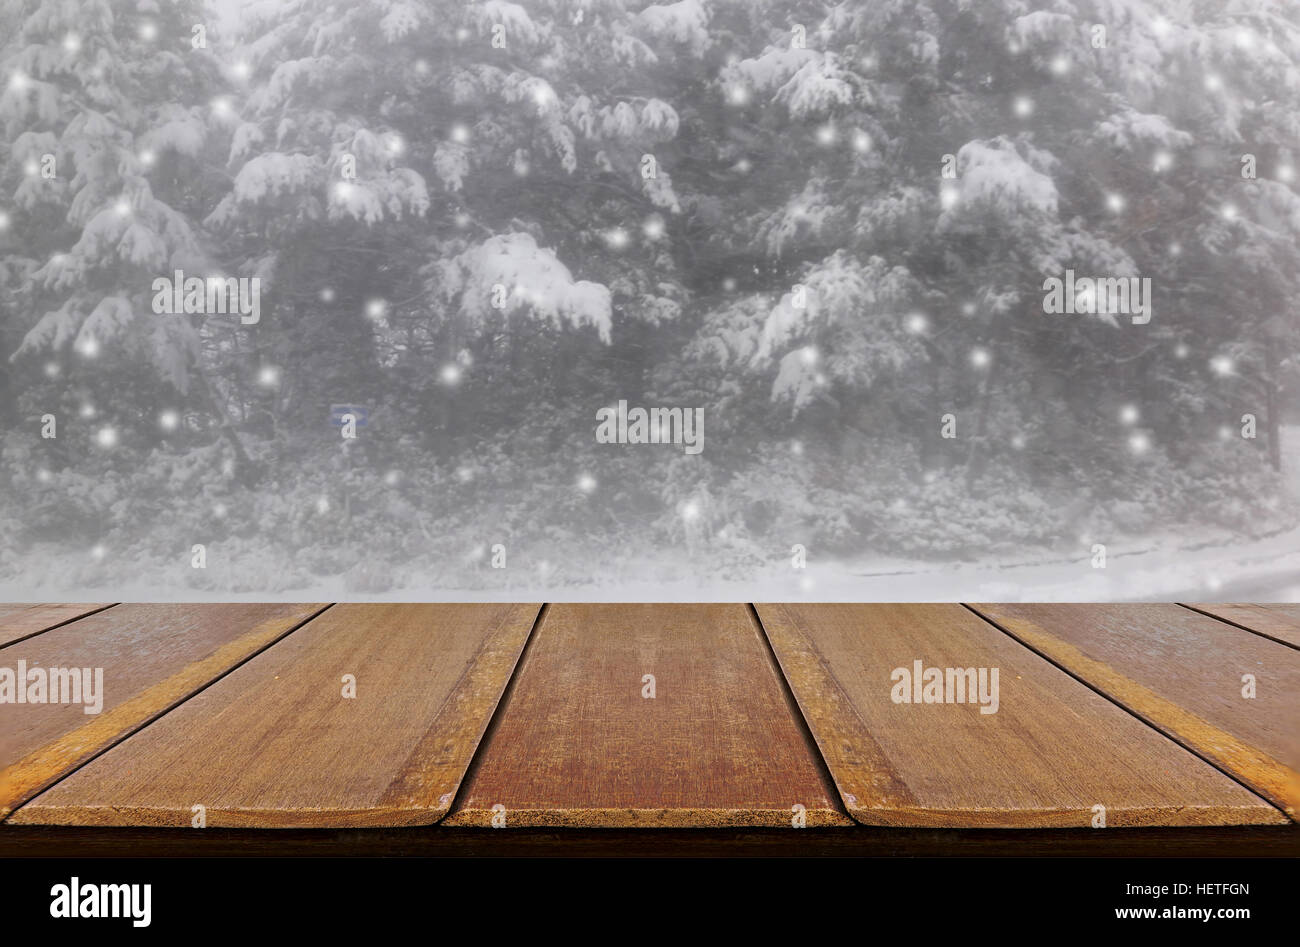 Blurred snowing in pine forest through glass window background with wood table. Stock Photo